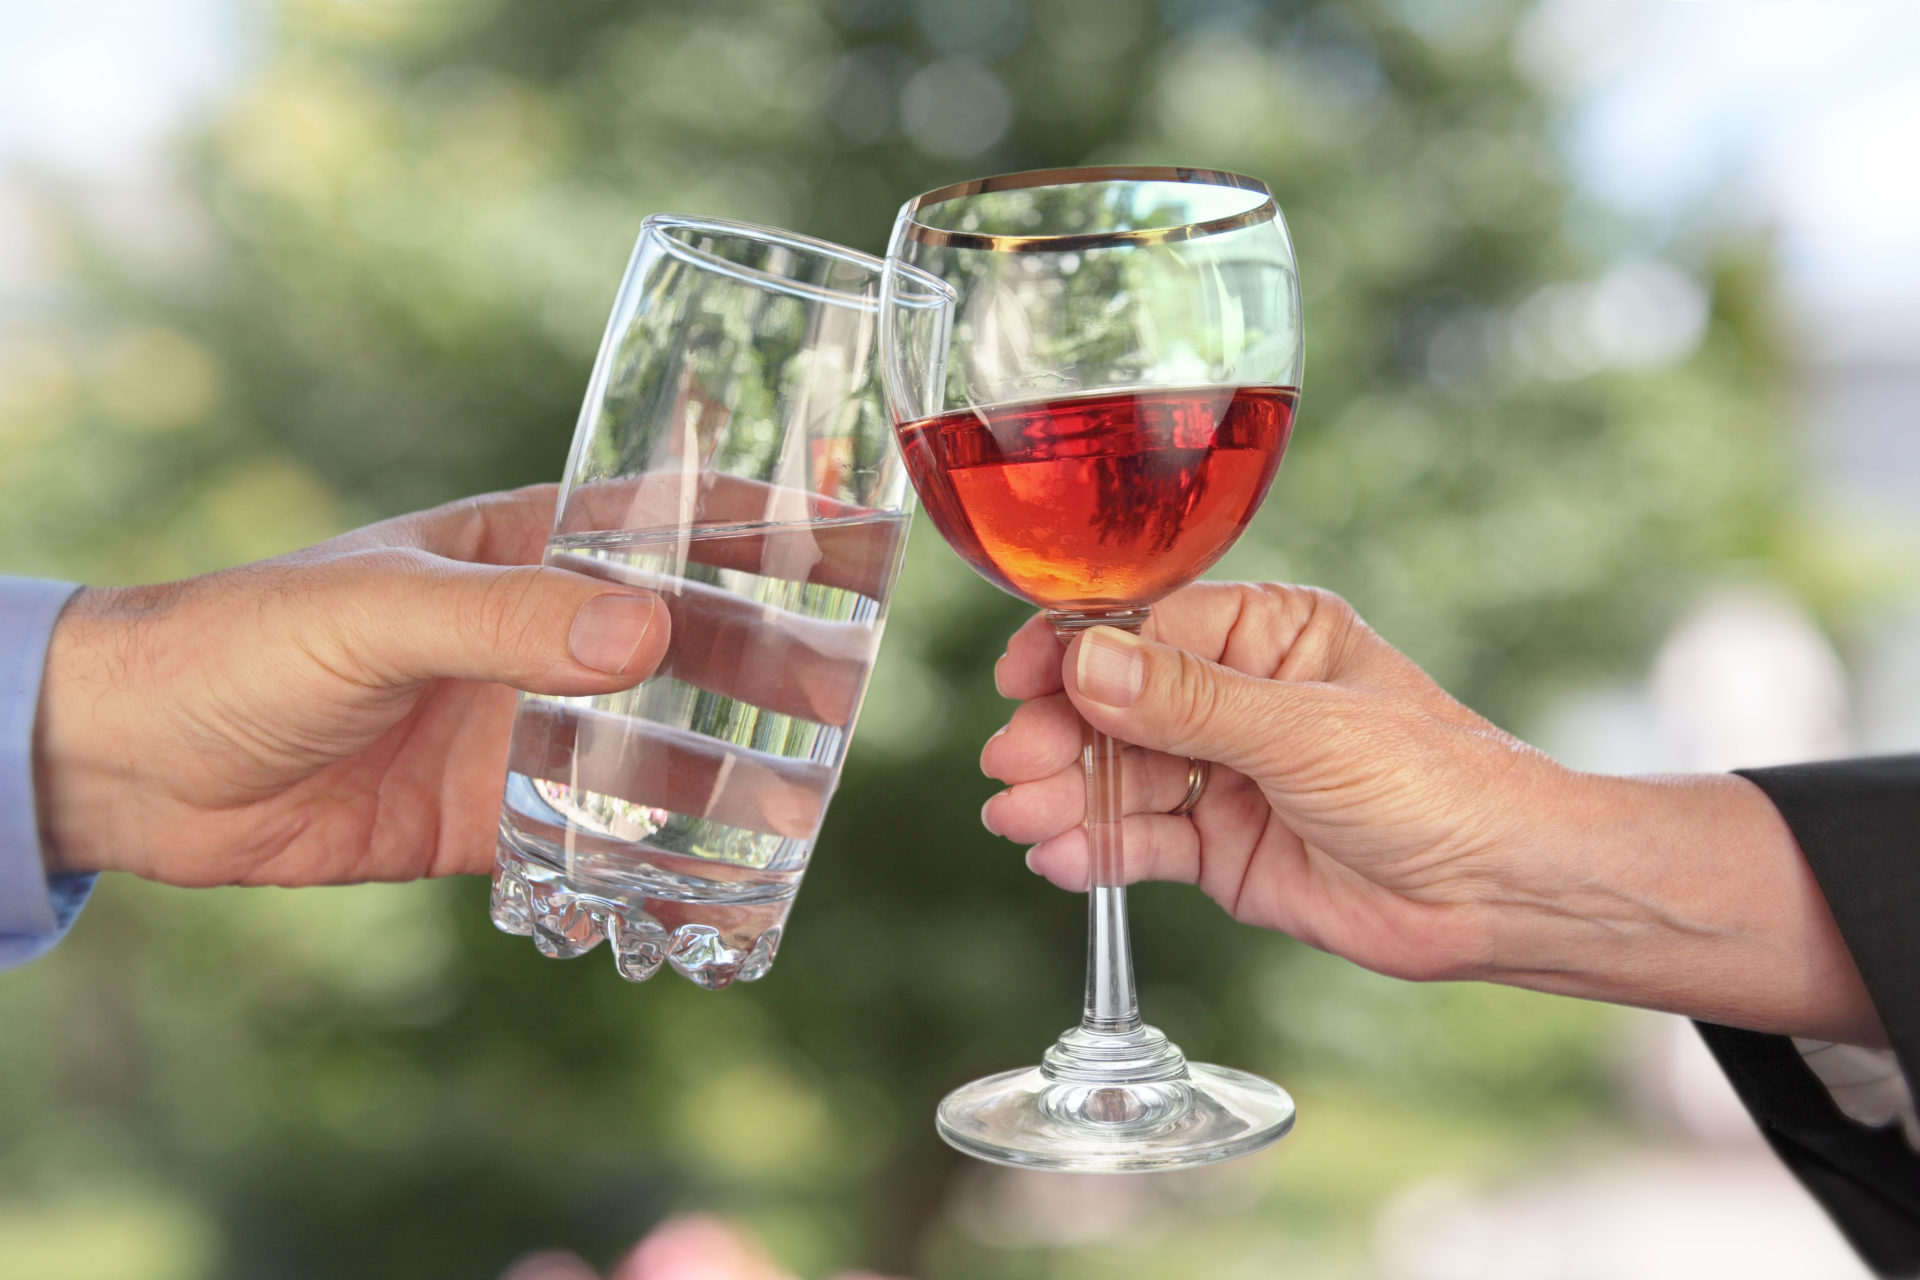 Two glasses clinking. Image: f:nalinframe / Alamy